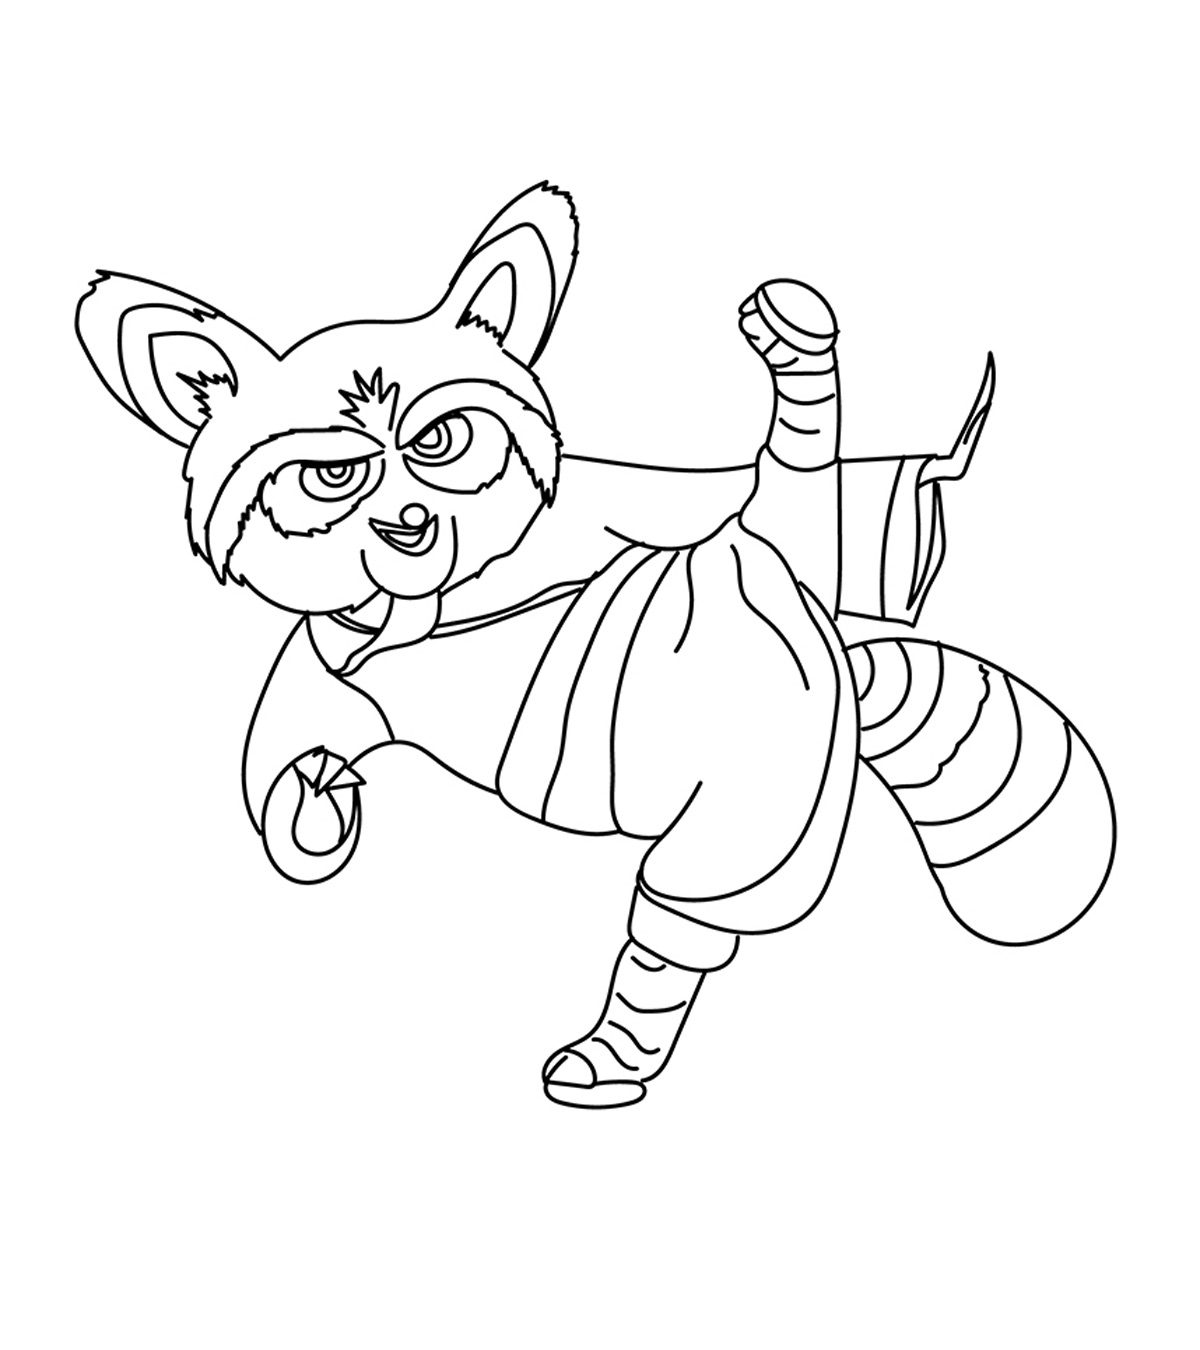 10 Cute Kung Fu Panda Coloring Pages For Your Little Ones